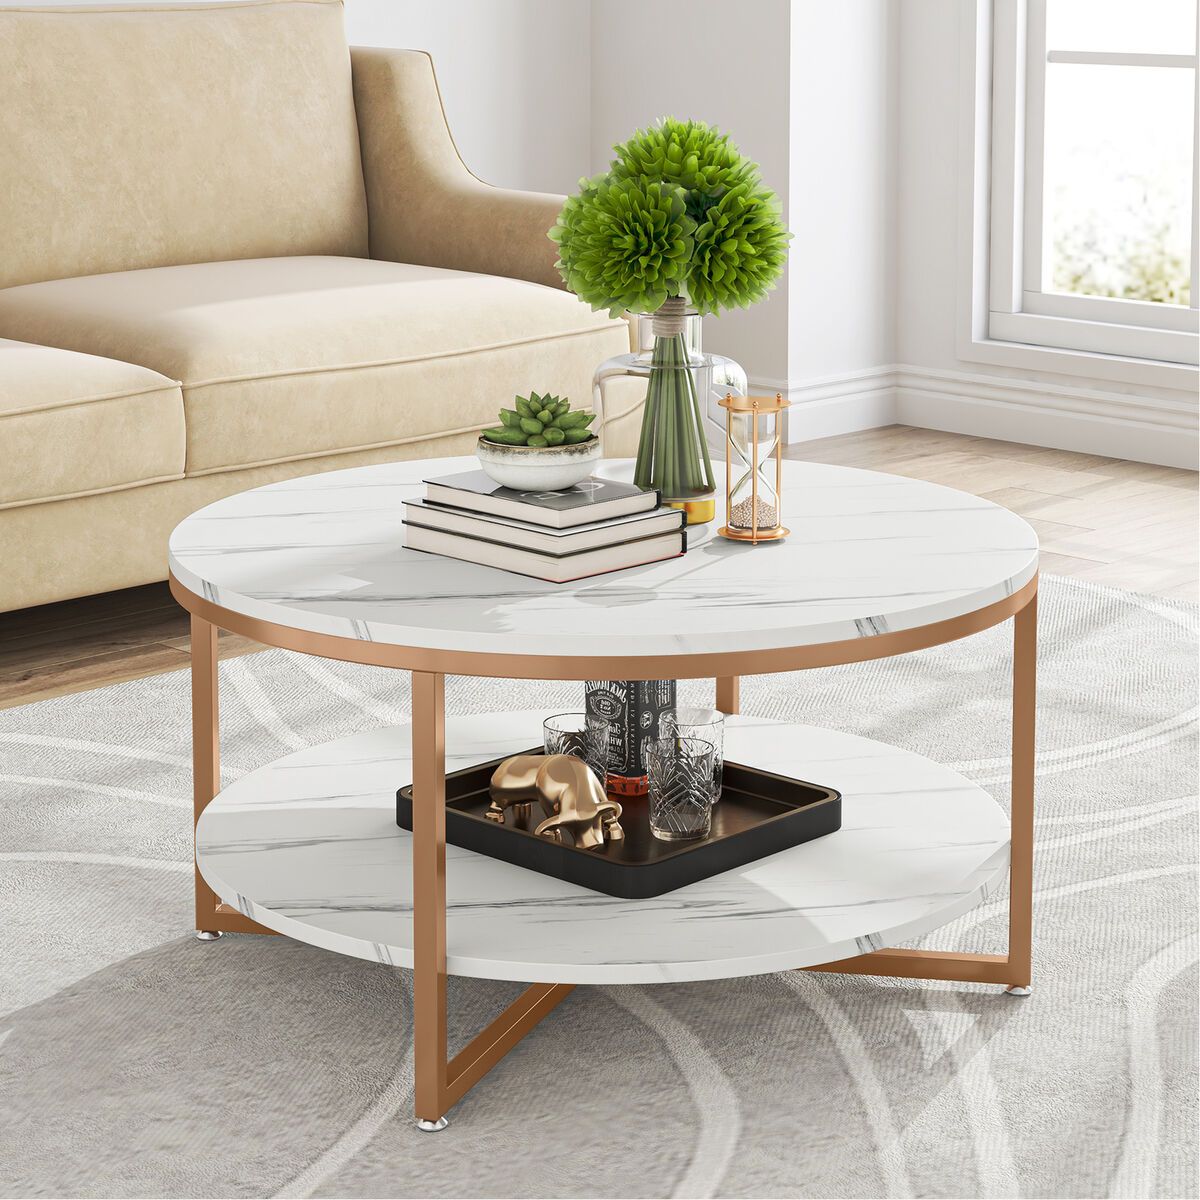 2 Tier Round Coffee Table With Storage, Modern Faux Marble Wood Coffee Table  | Ebay Intended For Modern Round Faux Marble Coffee Tables (Photo 3 of 15)